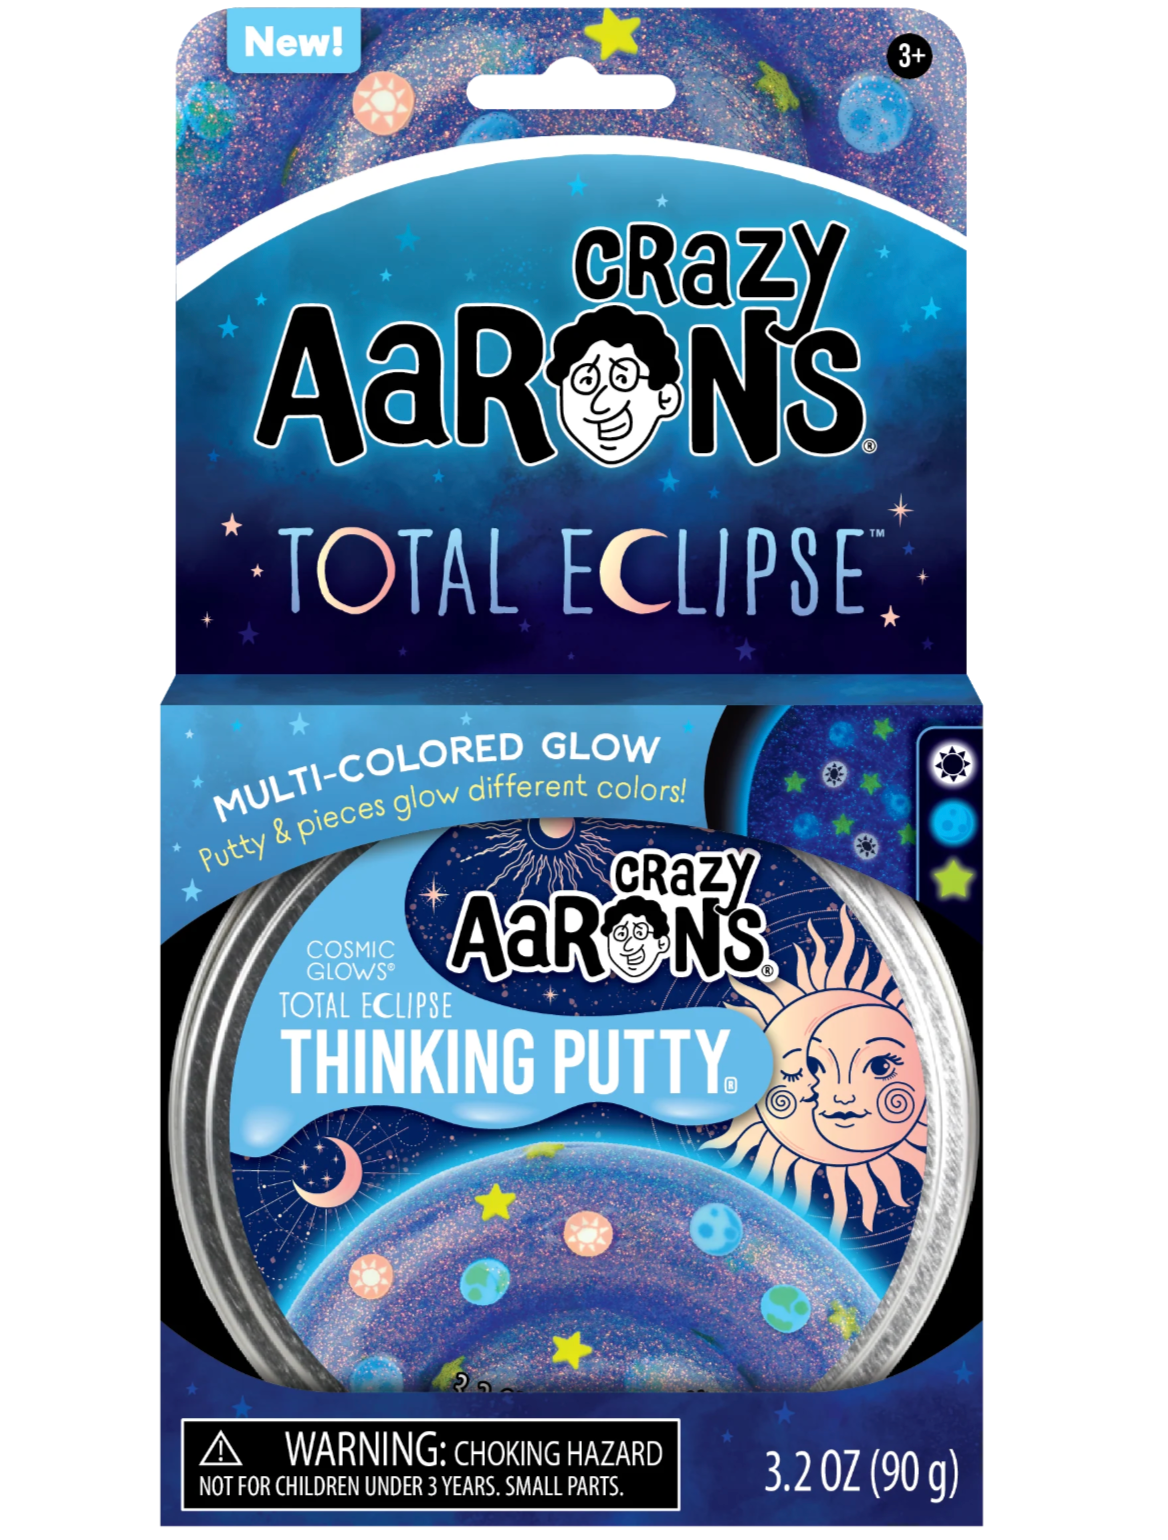 Crazy Aaron's Thinking Putty - Total Eclipse